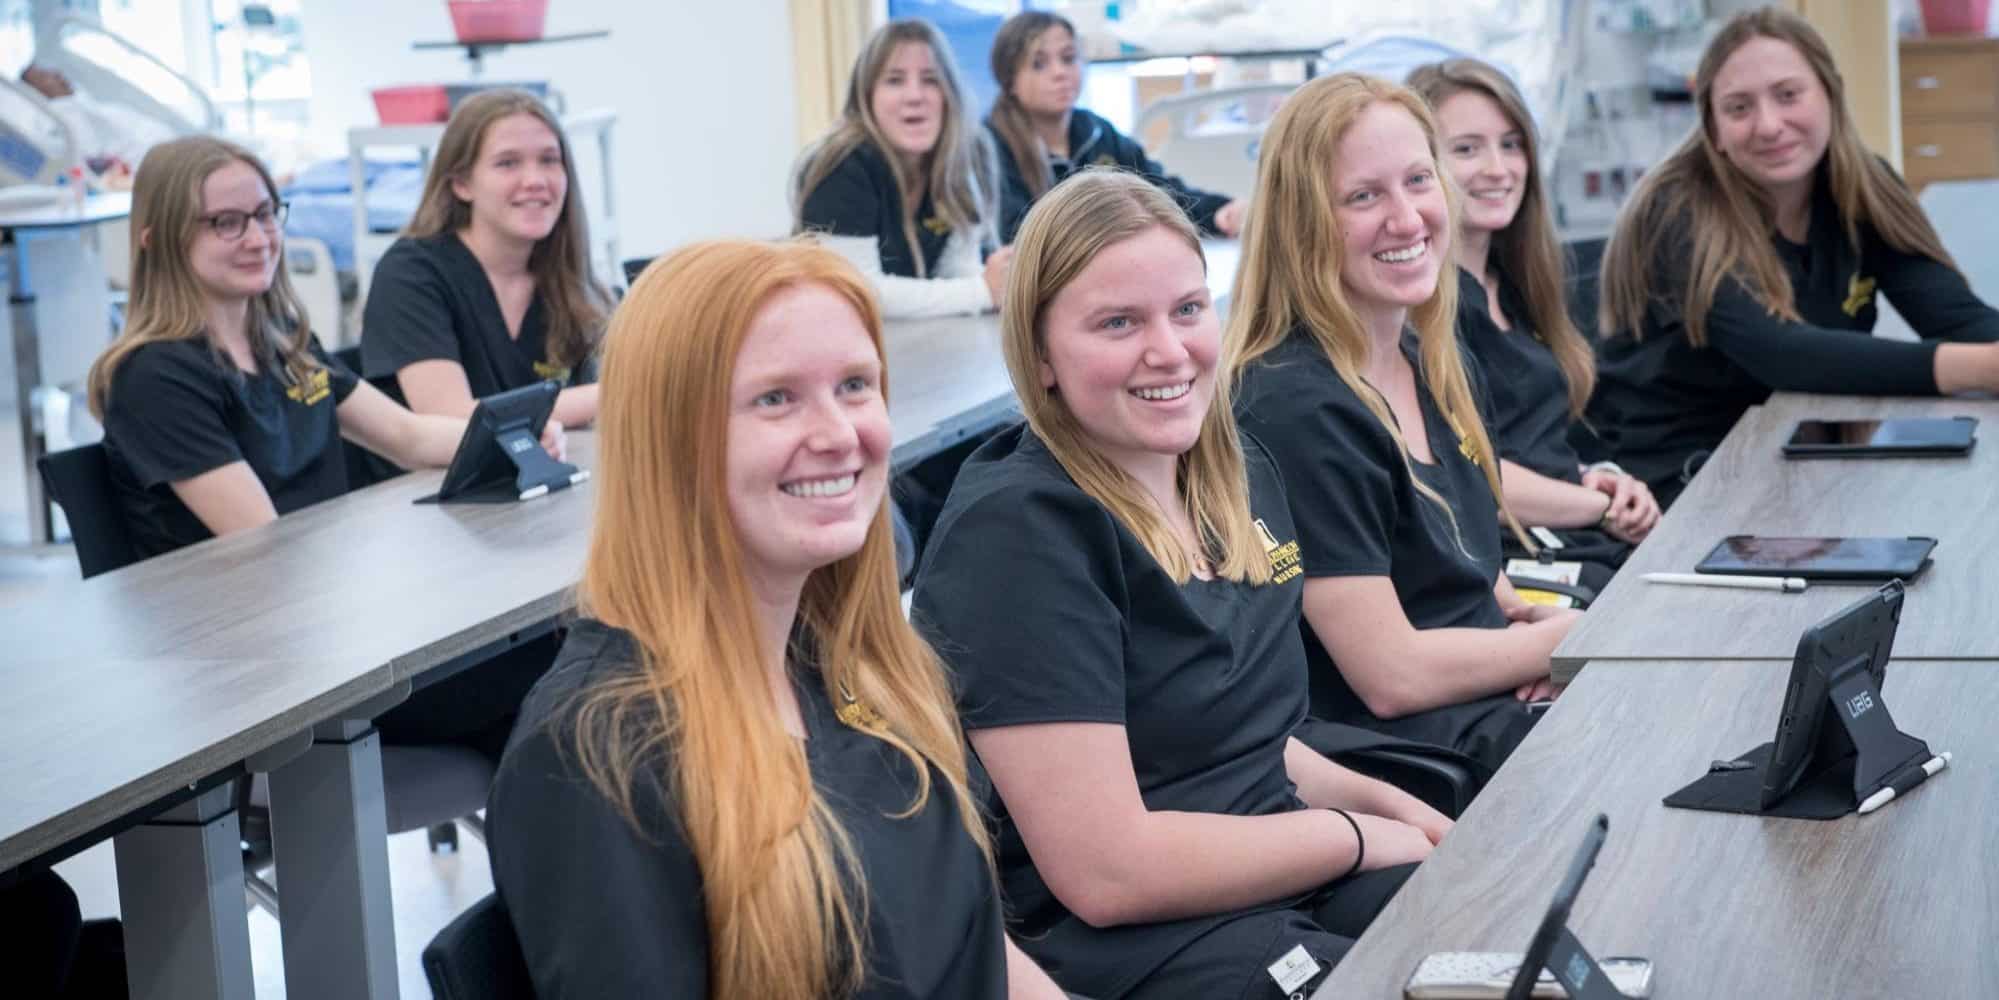 RMC nursing students smile during class